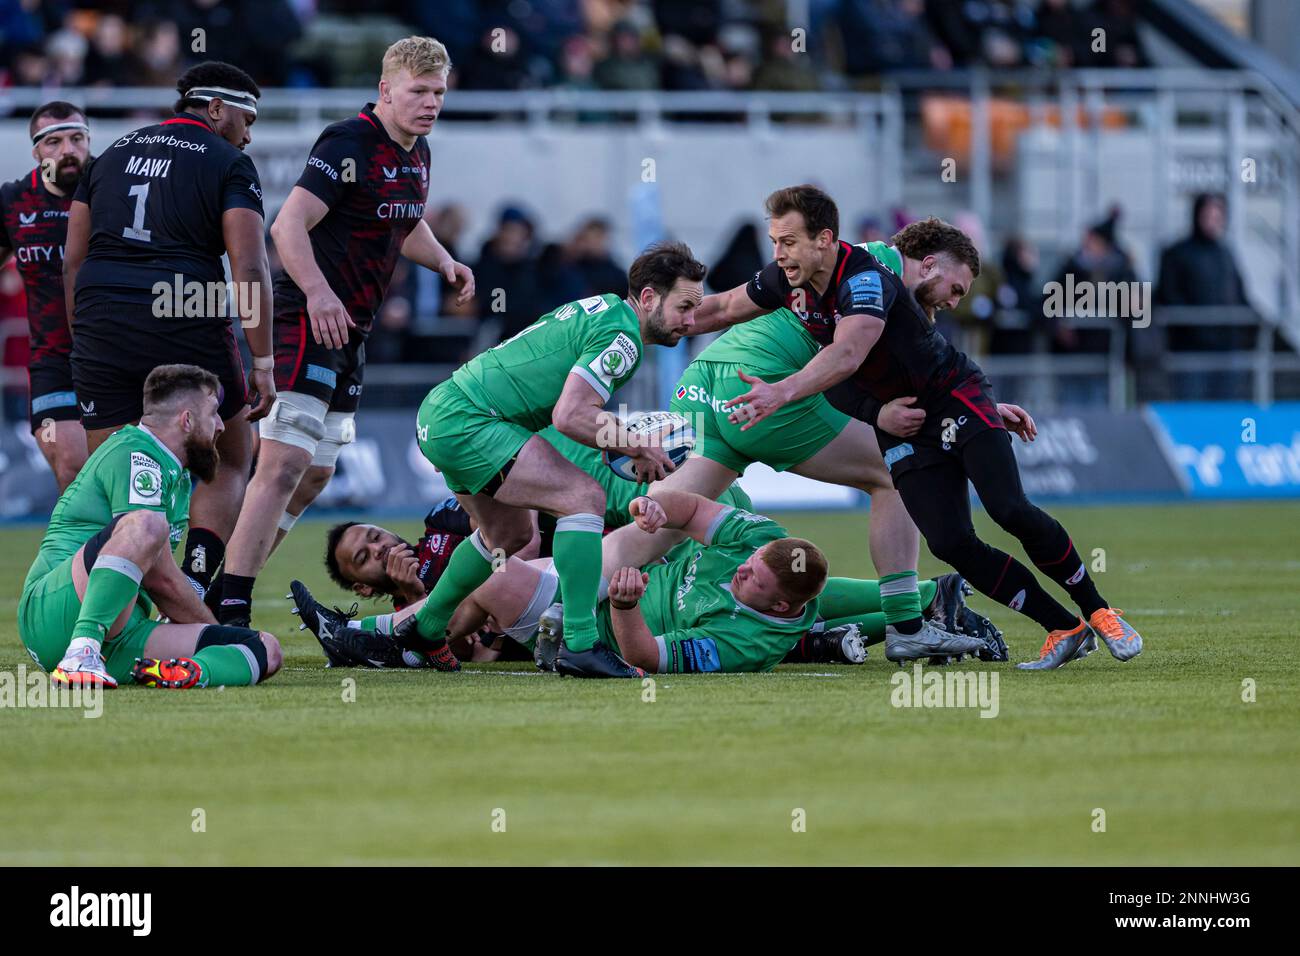 LONDON, UNITED KINGDOM. 25th, Feb 2023. Michael Young Newcastle Falcons (Capt.) (centre) in action during Gallagher Premiership Rugby Match between Saracens vs Newcastle Falcons at StoneX Stadium on Saturday, 25 February 2023. LONDON ENGLAND.  Credit: Taka G Wu/Alamy Live News Stock Photo